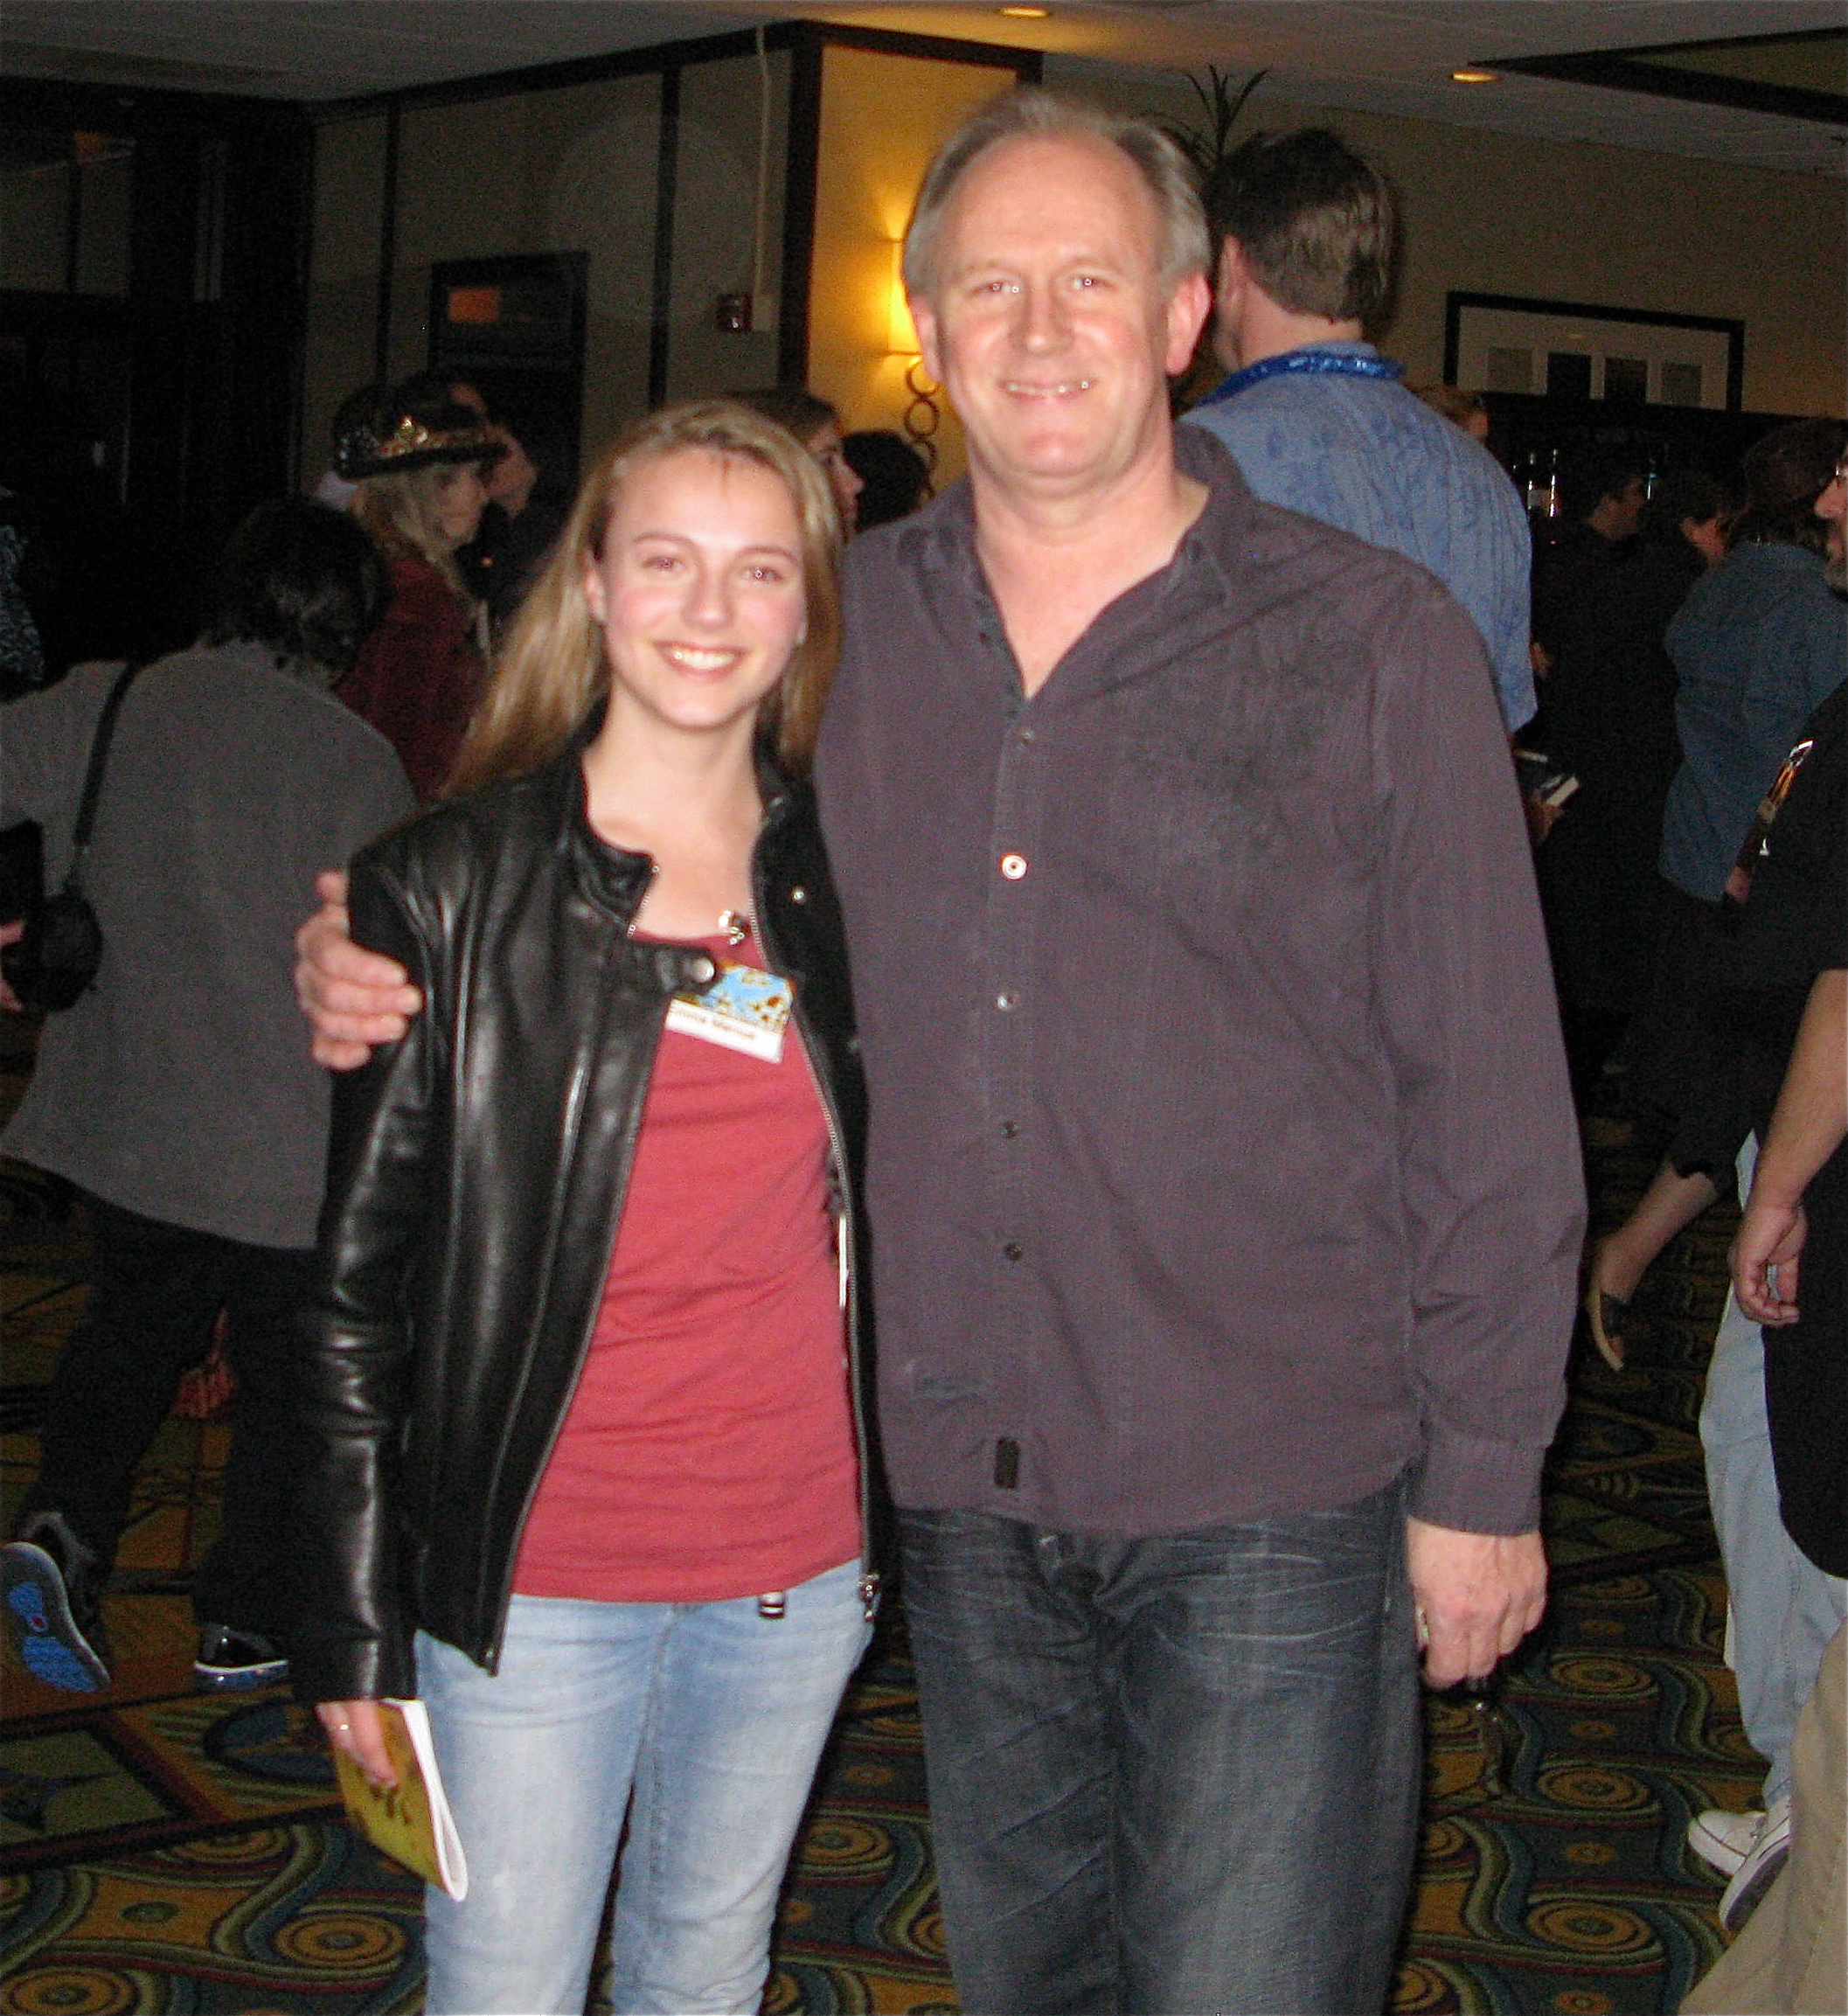 Emma with Peter Davison, the 5th Doctor, at Gallifrey One's Dr. Who Convention